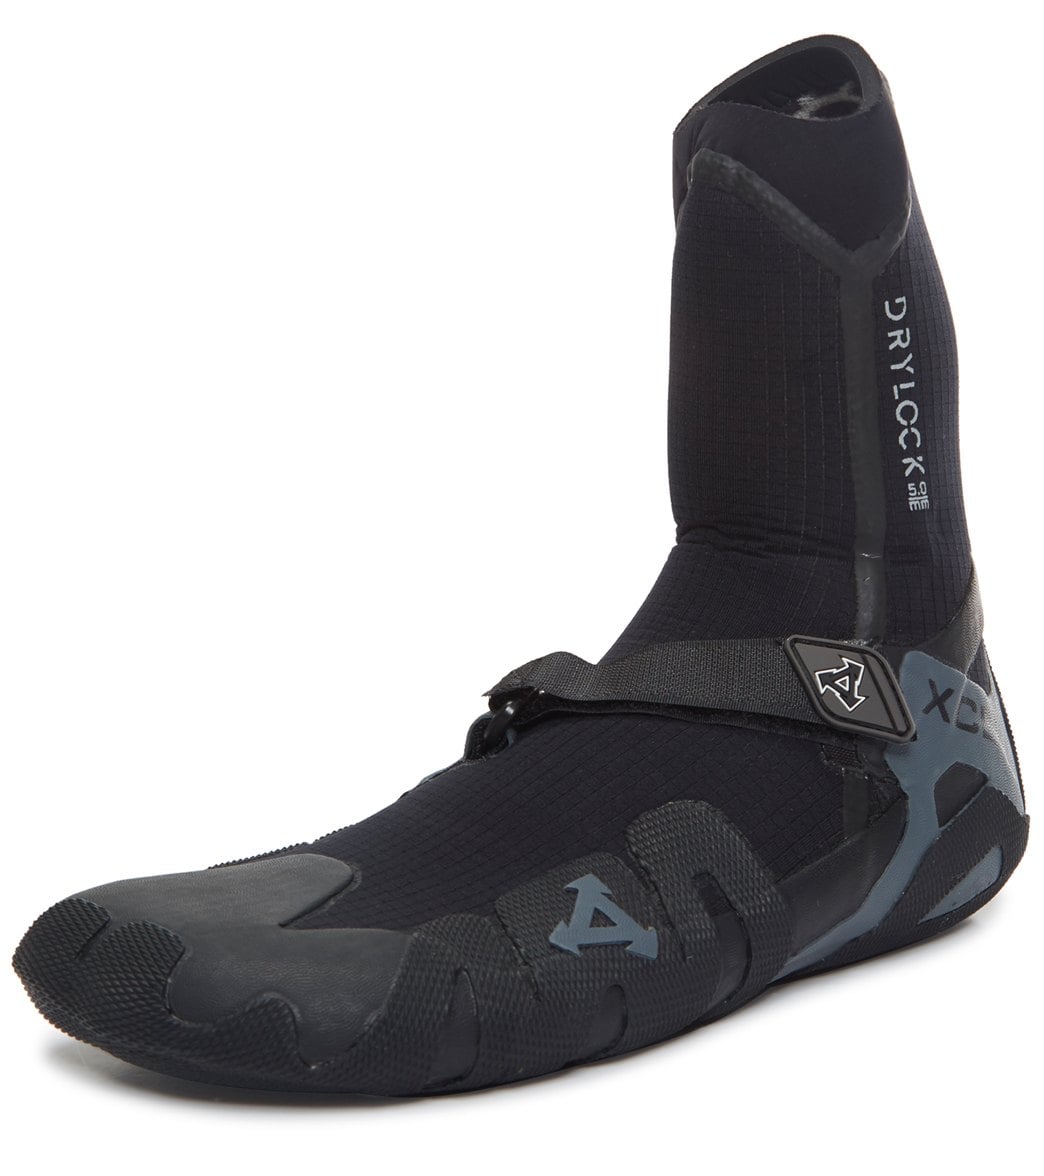 Xcel Drylock Round Toe 5mm Surf Boot at 